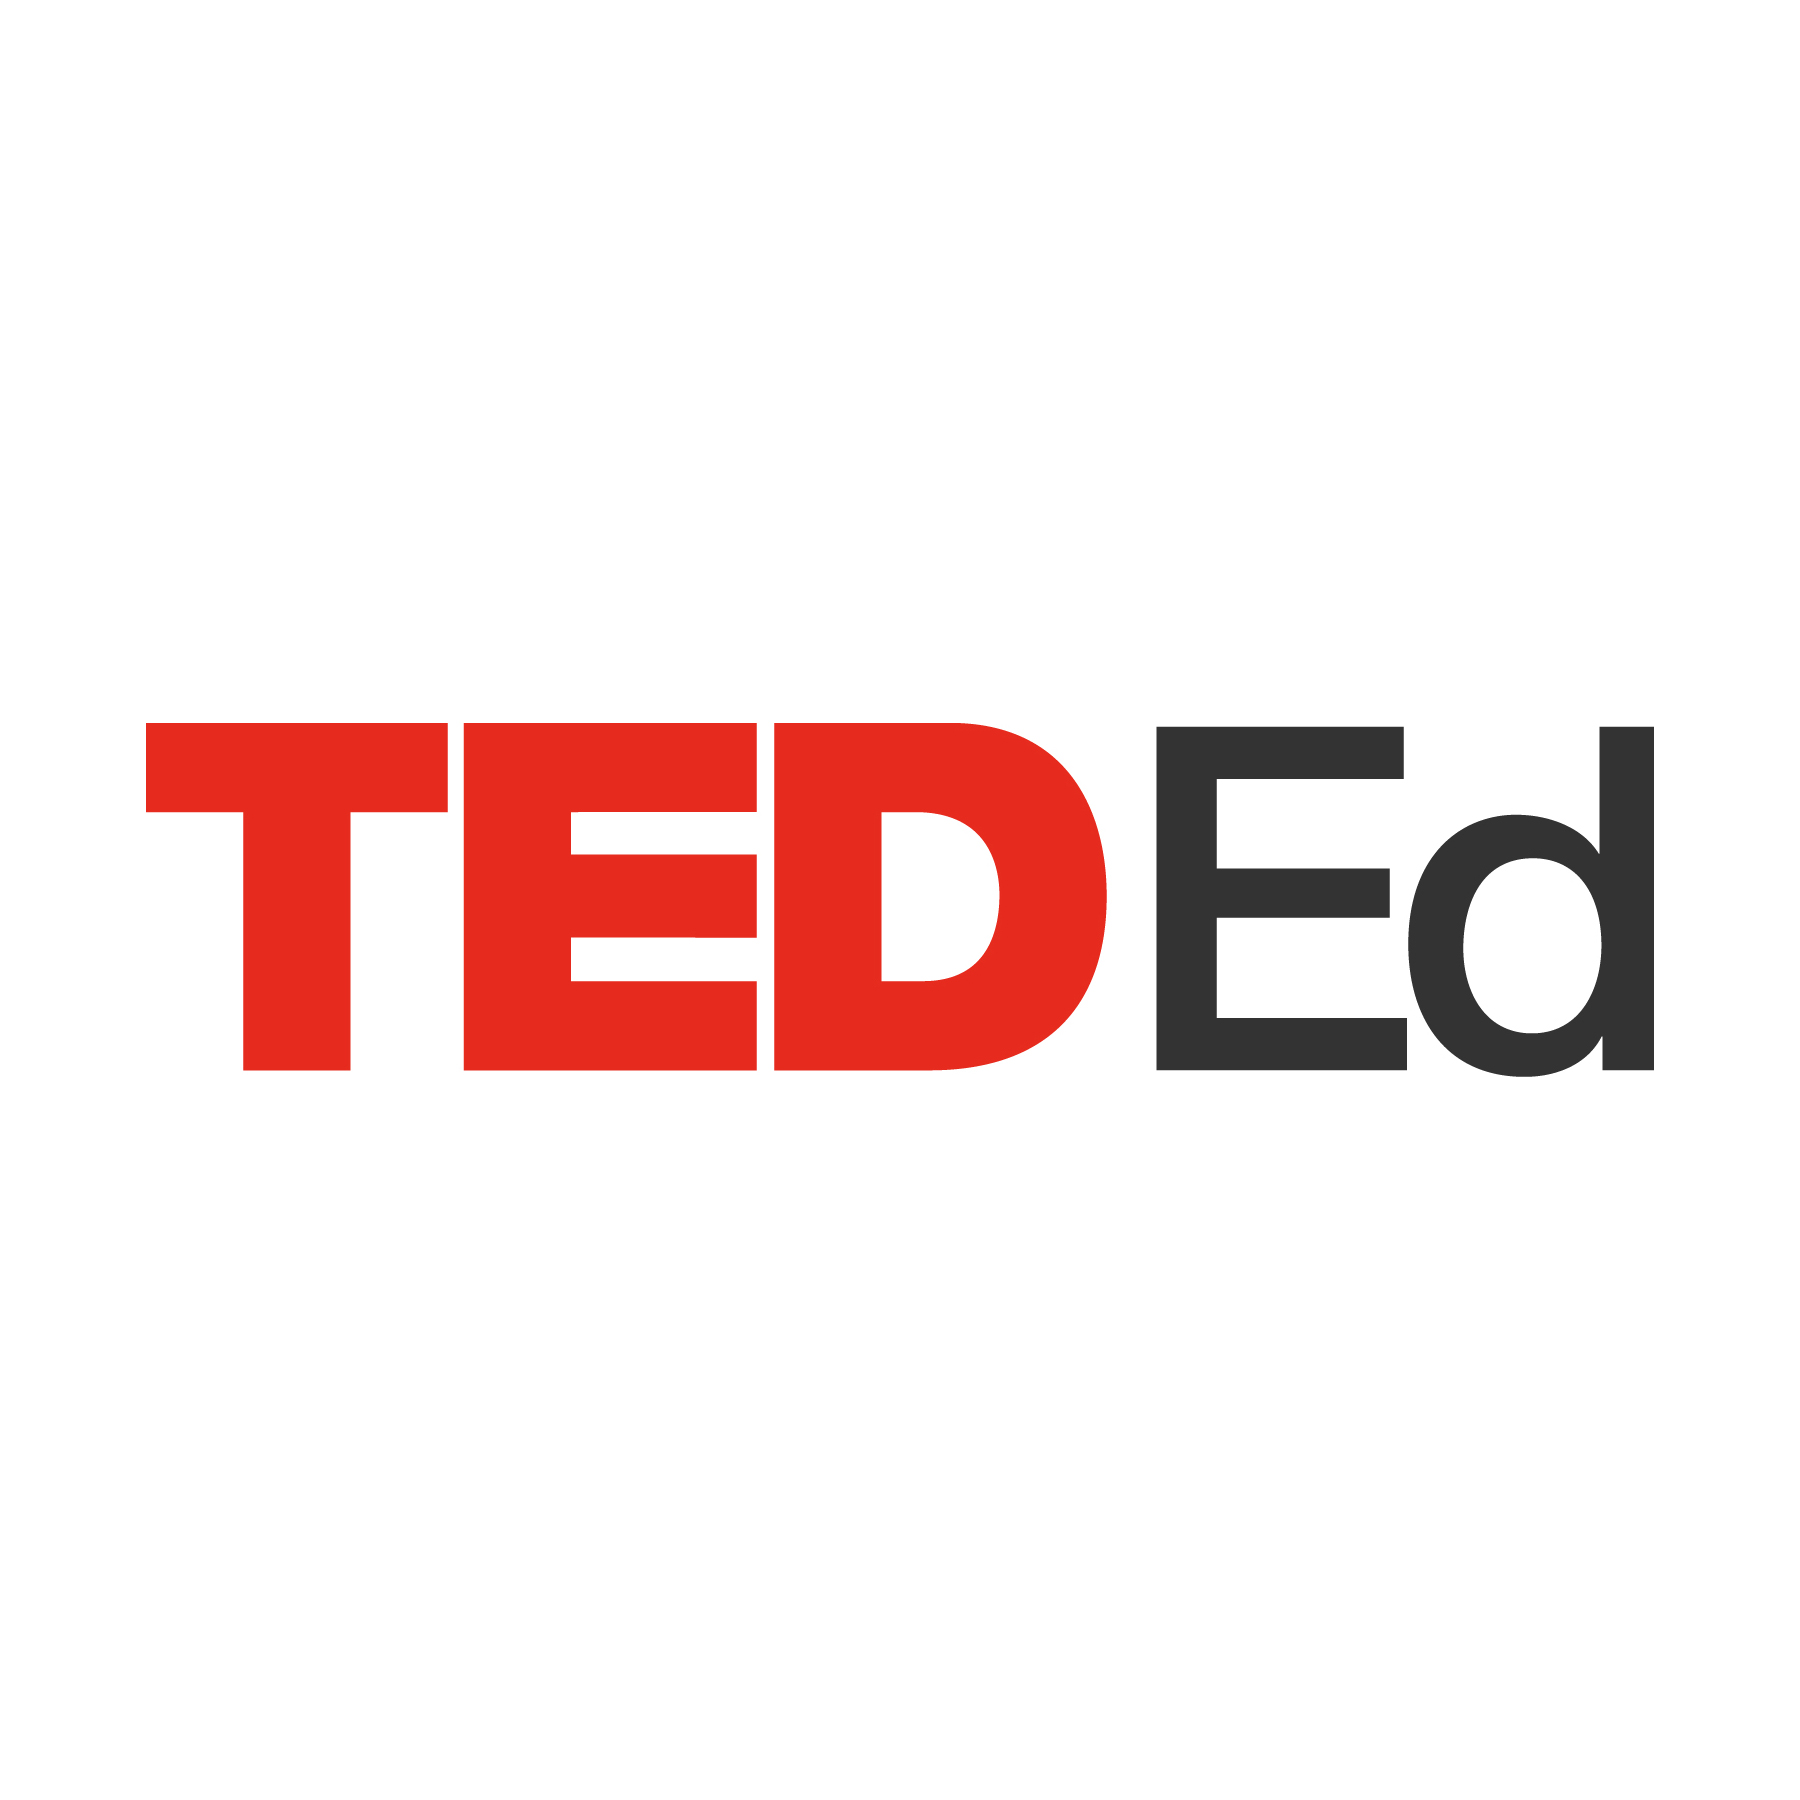 Watch TED-Ed videos